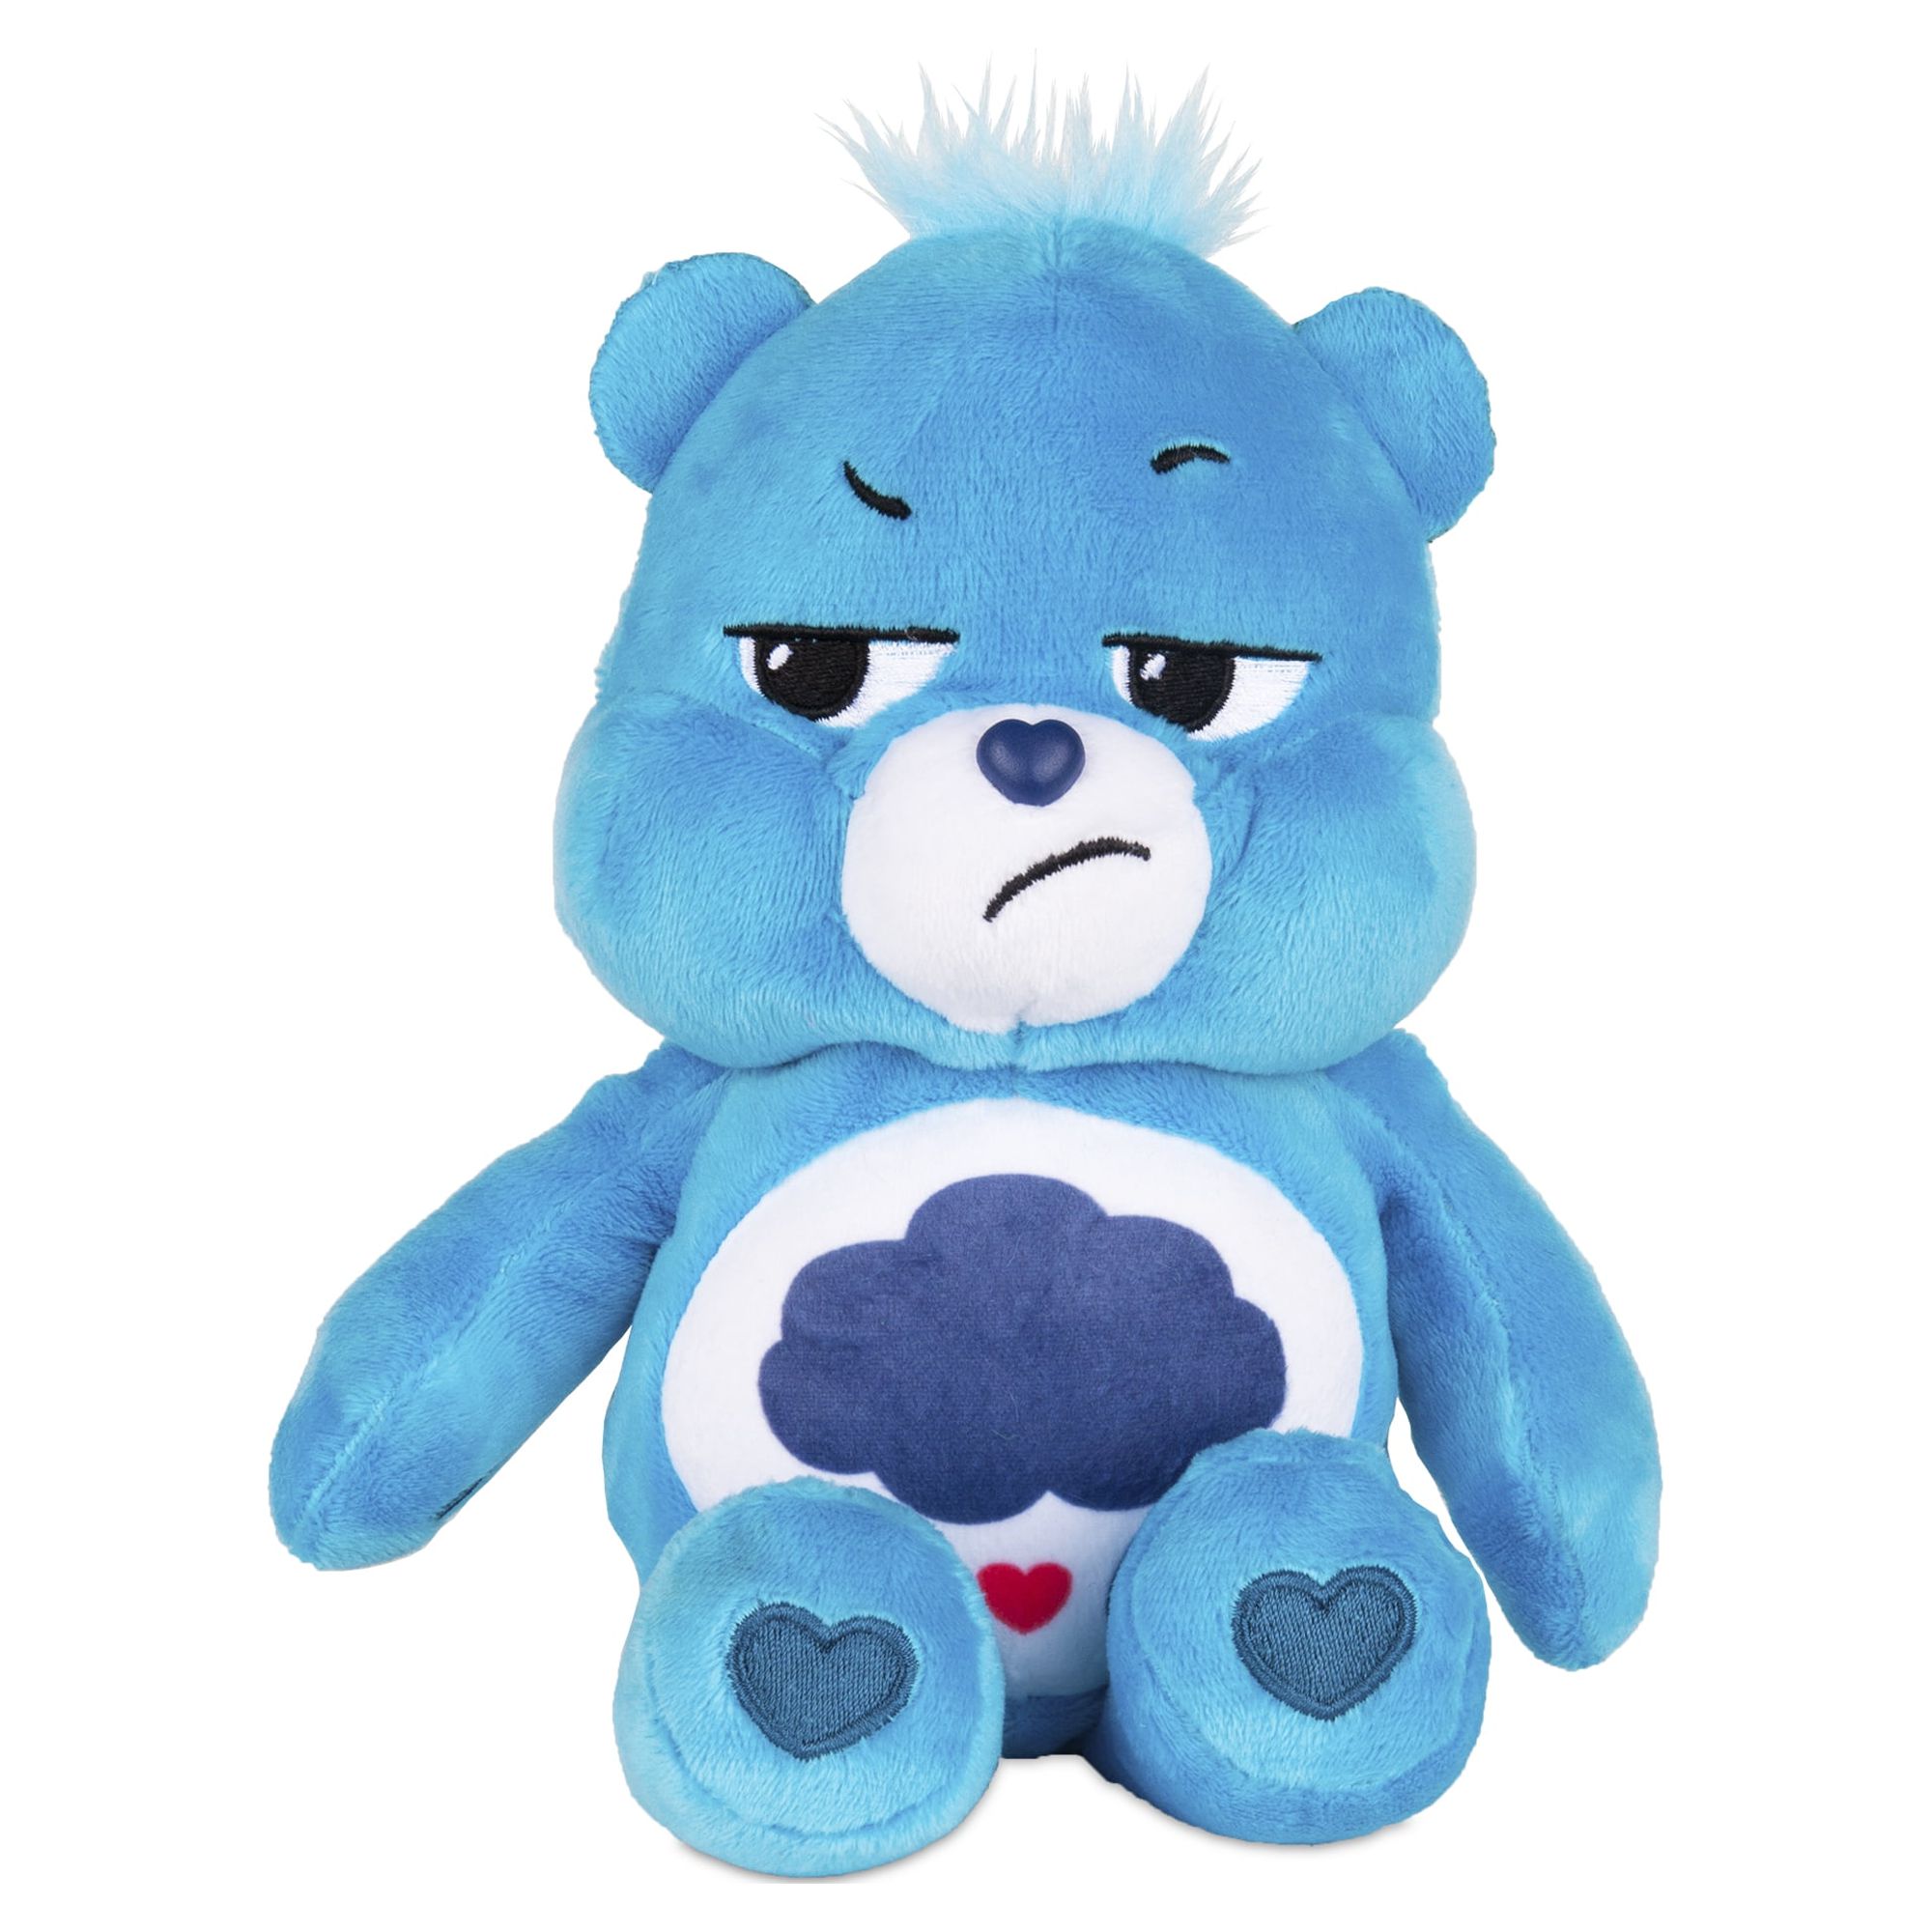 Care Bears - 9" Bean Plush - Special Collector Set - Exclusive Harmony Bear Included! - image 3 of 9